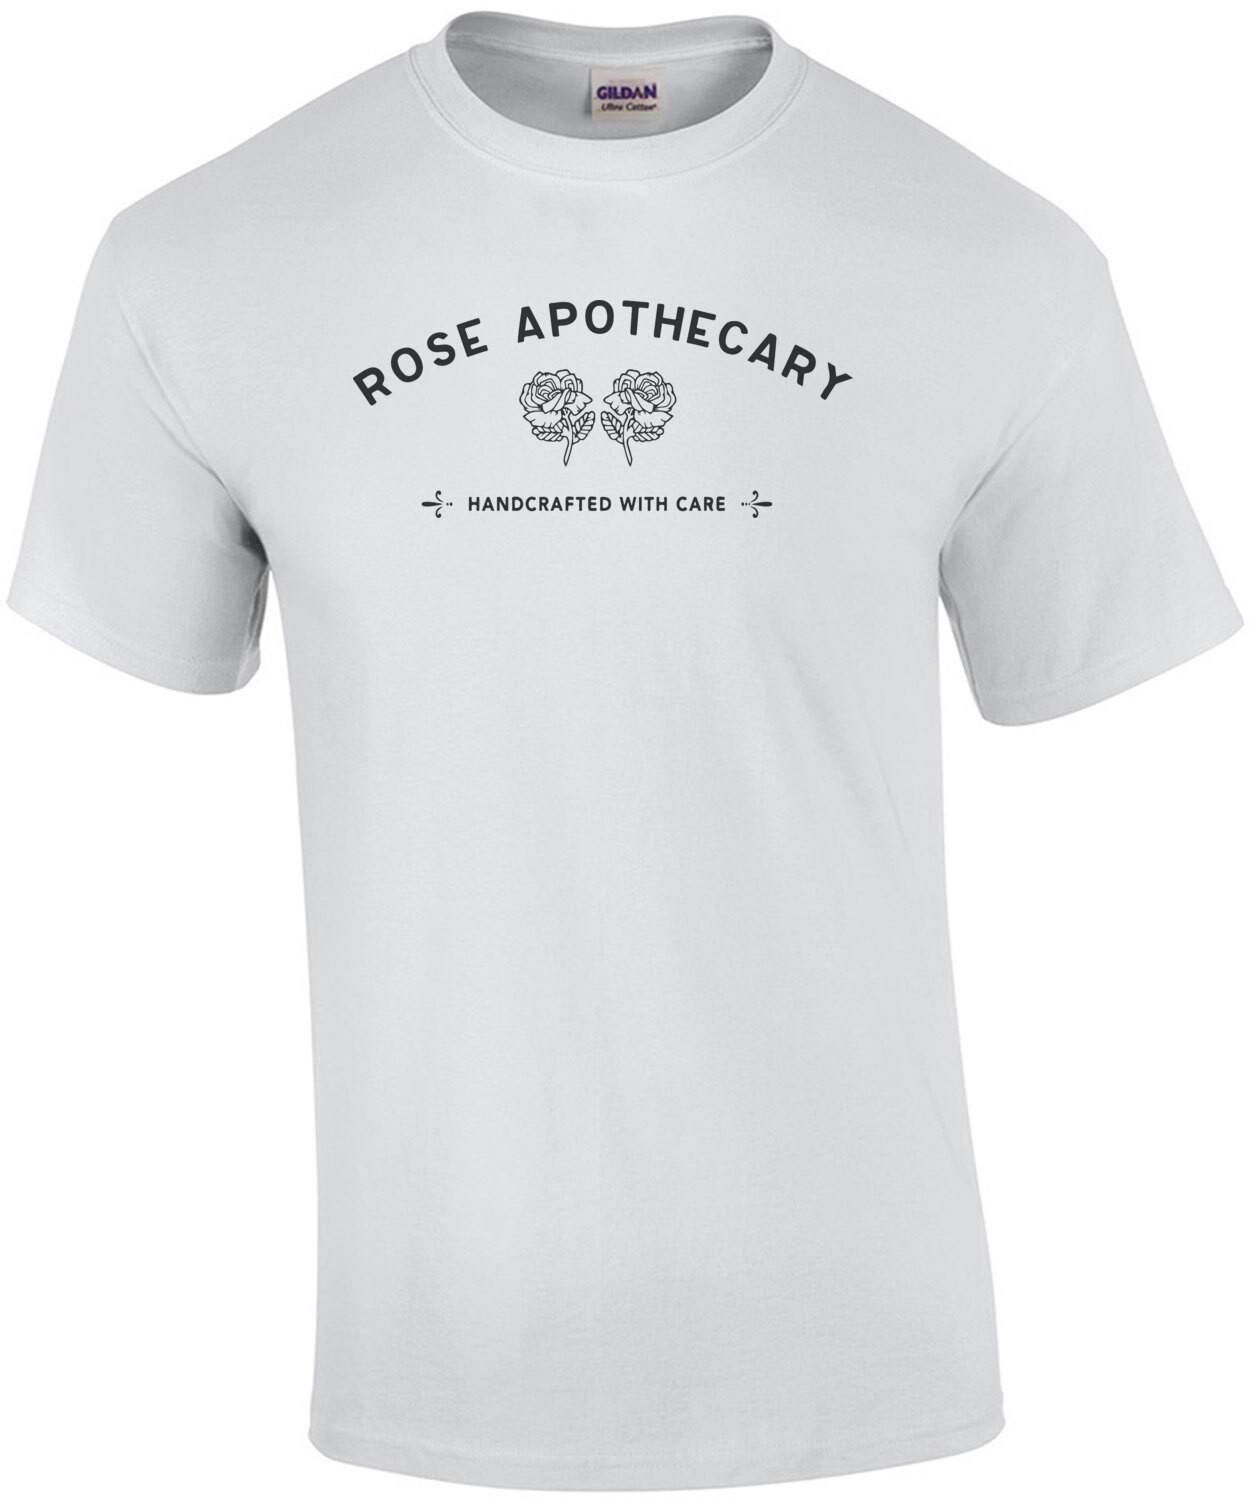 Rose Apothecary - Handcrafted with care - Schitt's Creek T-Shirt